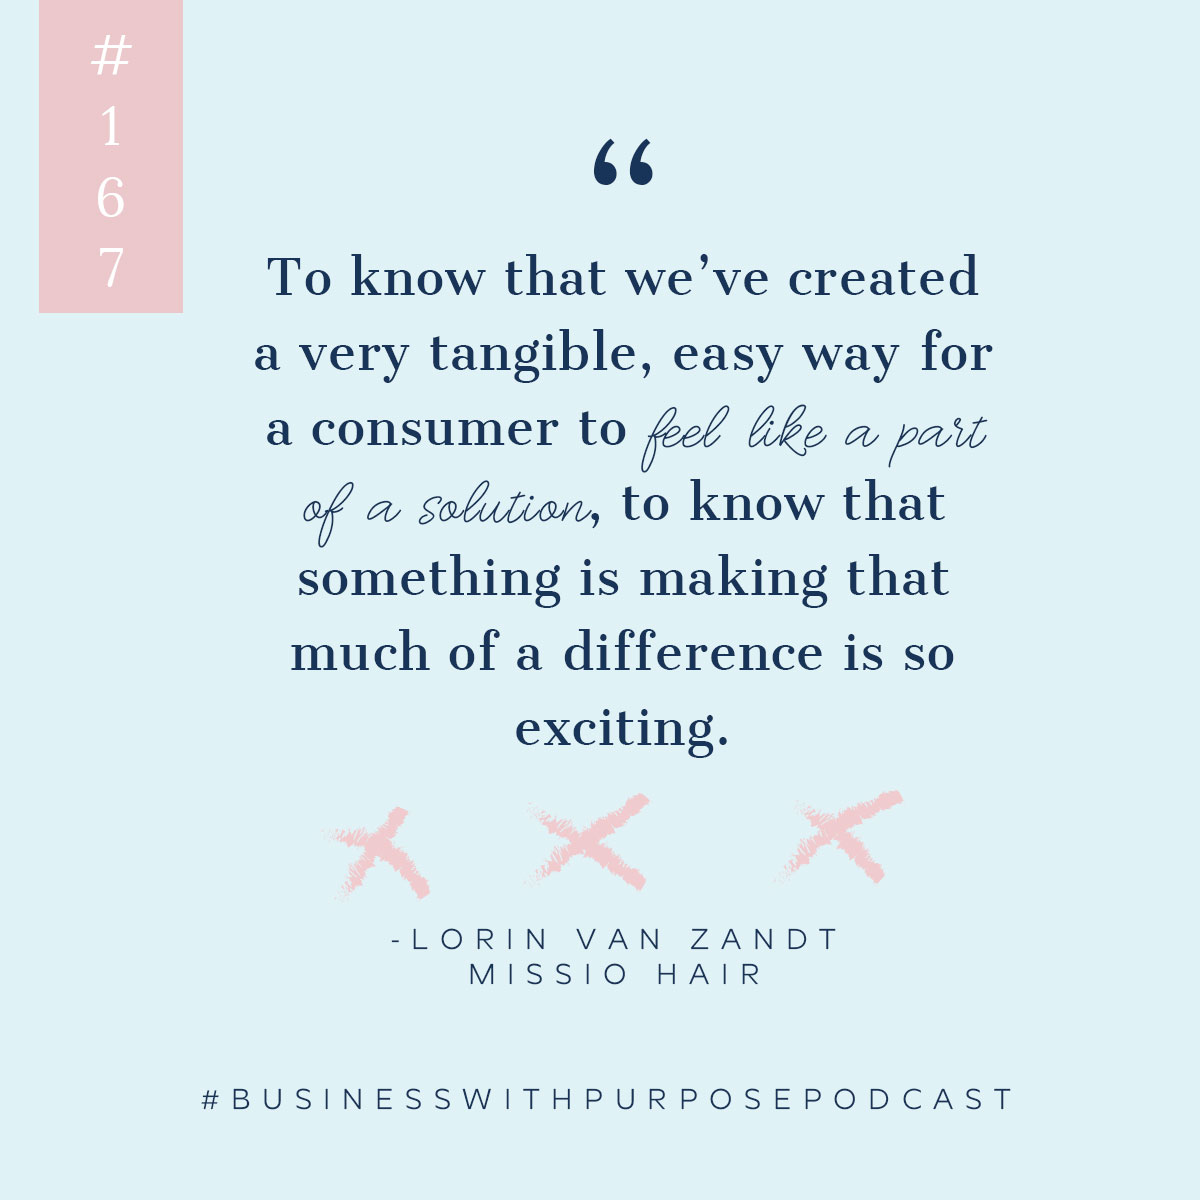 Hair Products that Fight Human Trafficking | Business with Purpose Podcast EP 167: Lorin Van Zandt, Founder of MISSIO Hair